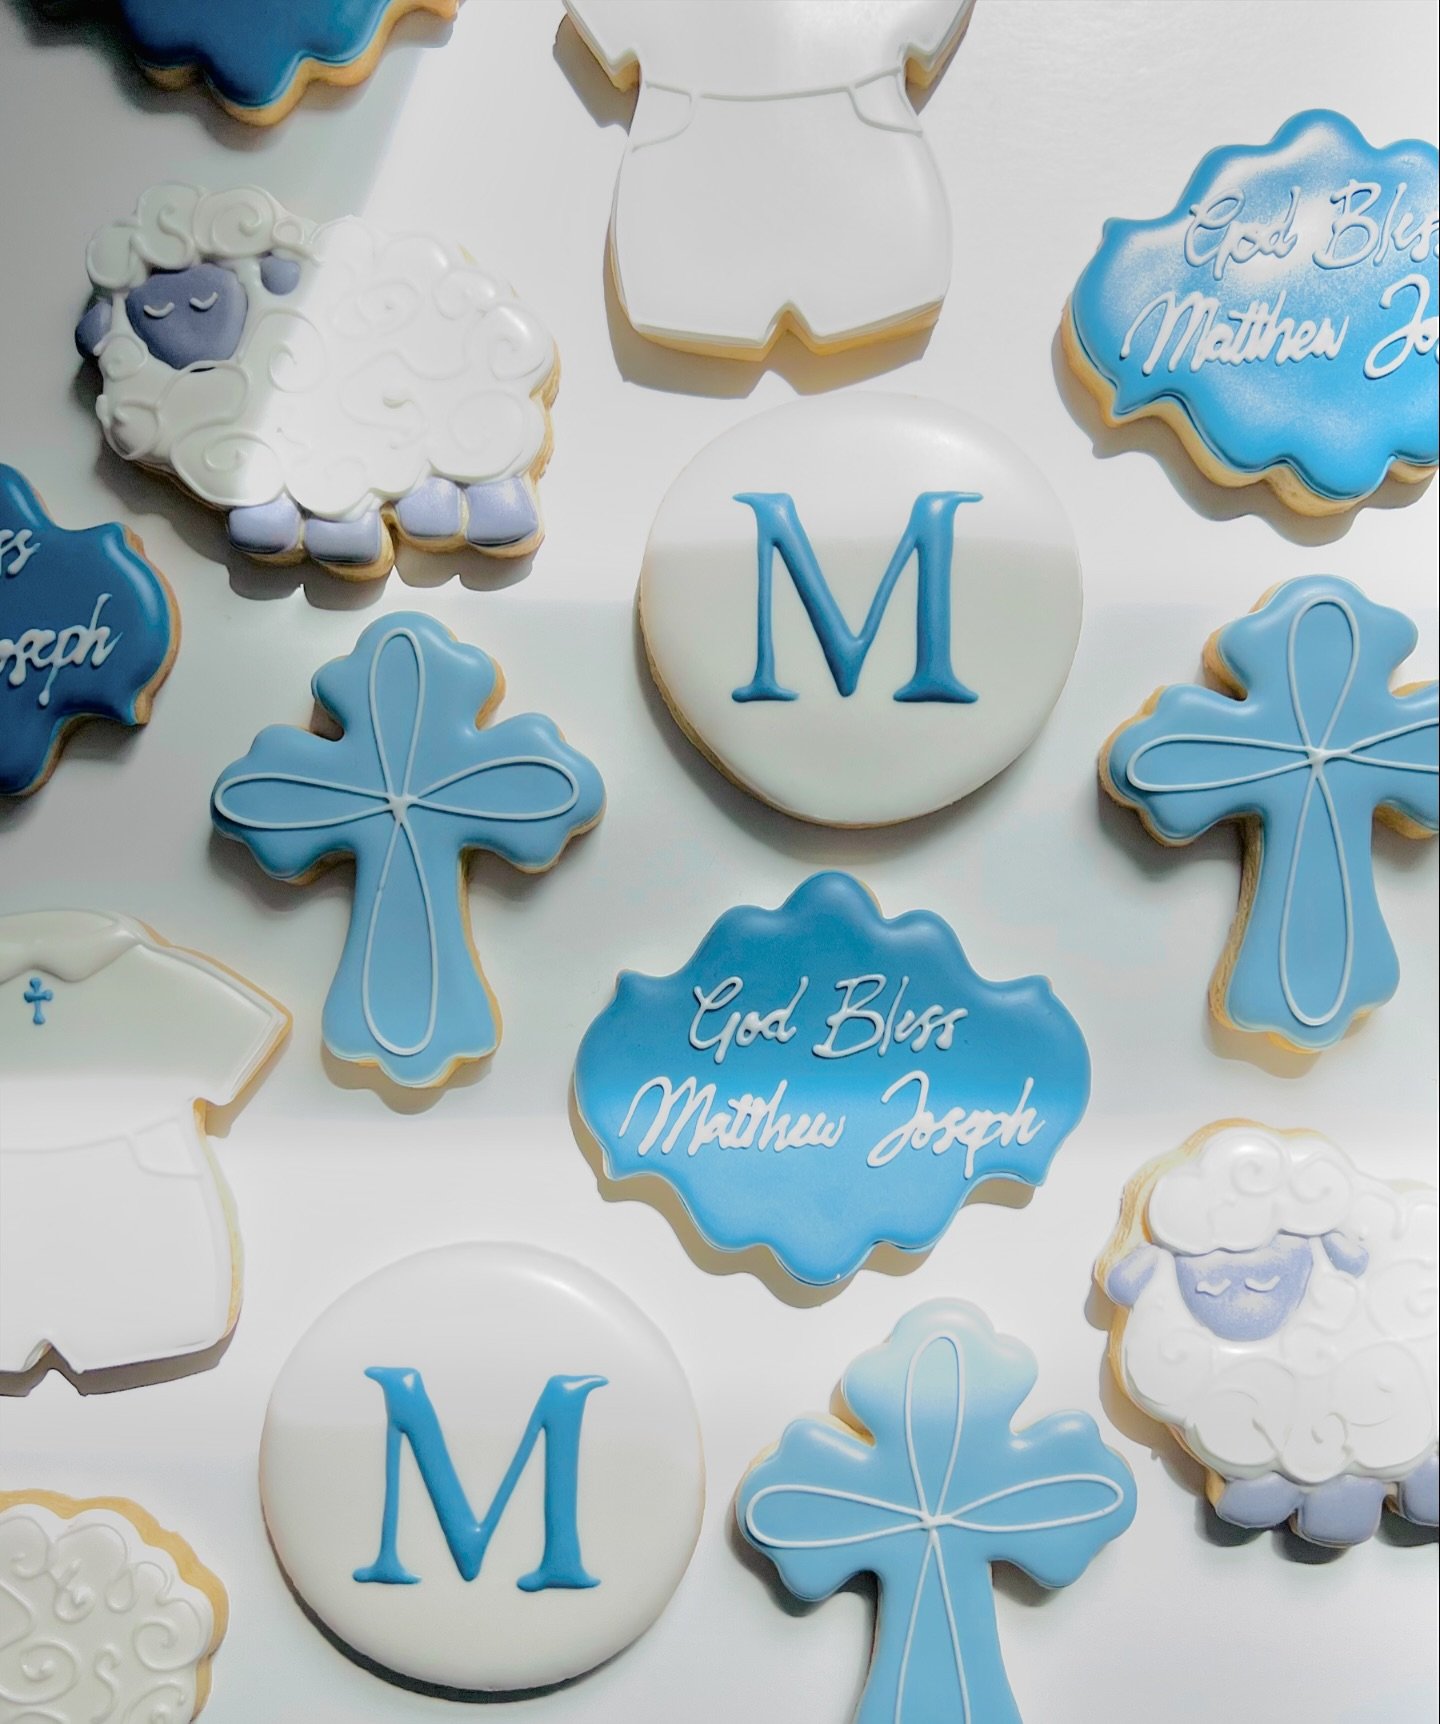 It was all about the baby blues this past weekend and we&rsquo;re all here for it 💙🤍

#christening ponies #baptismbakes #customcookies #capebatter #plymouthma #capecodma #southshorema #decoratedcookies #bakingmama #godblesscookies #sweetandsimple #